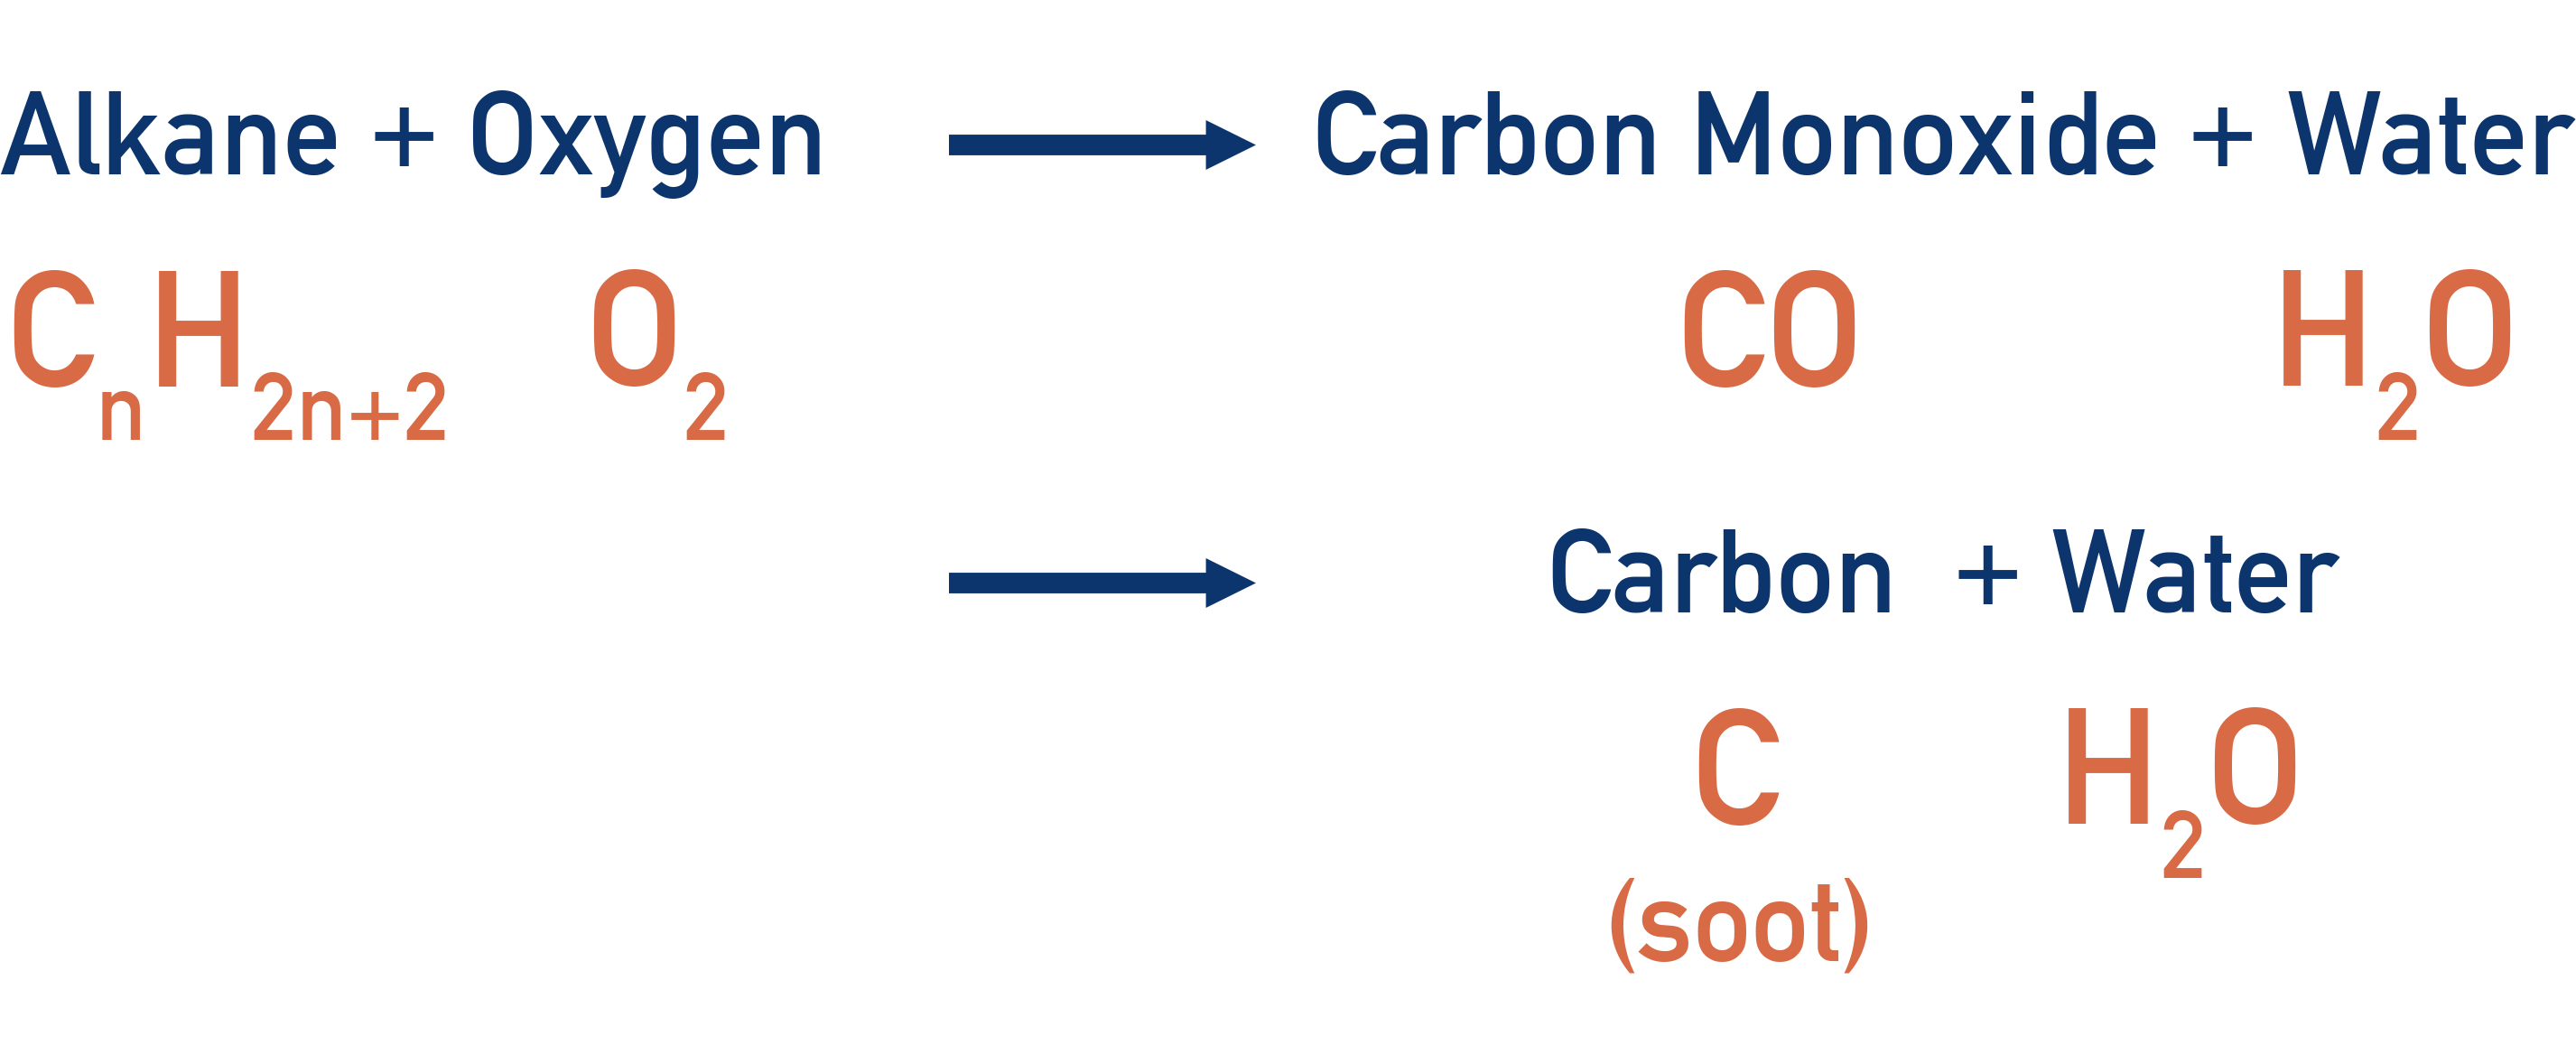 incomplete combustion of alkane carbon monoxide and soot and water a-level chemistry